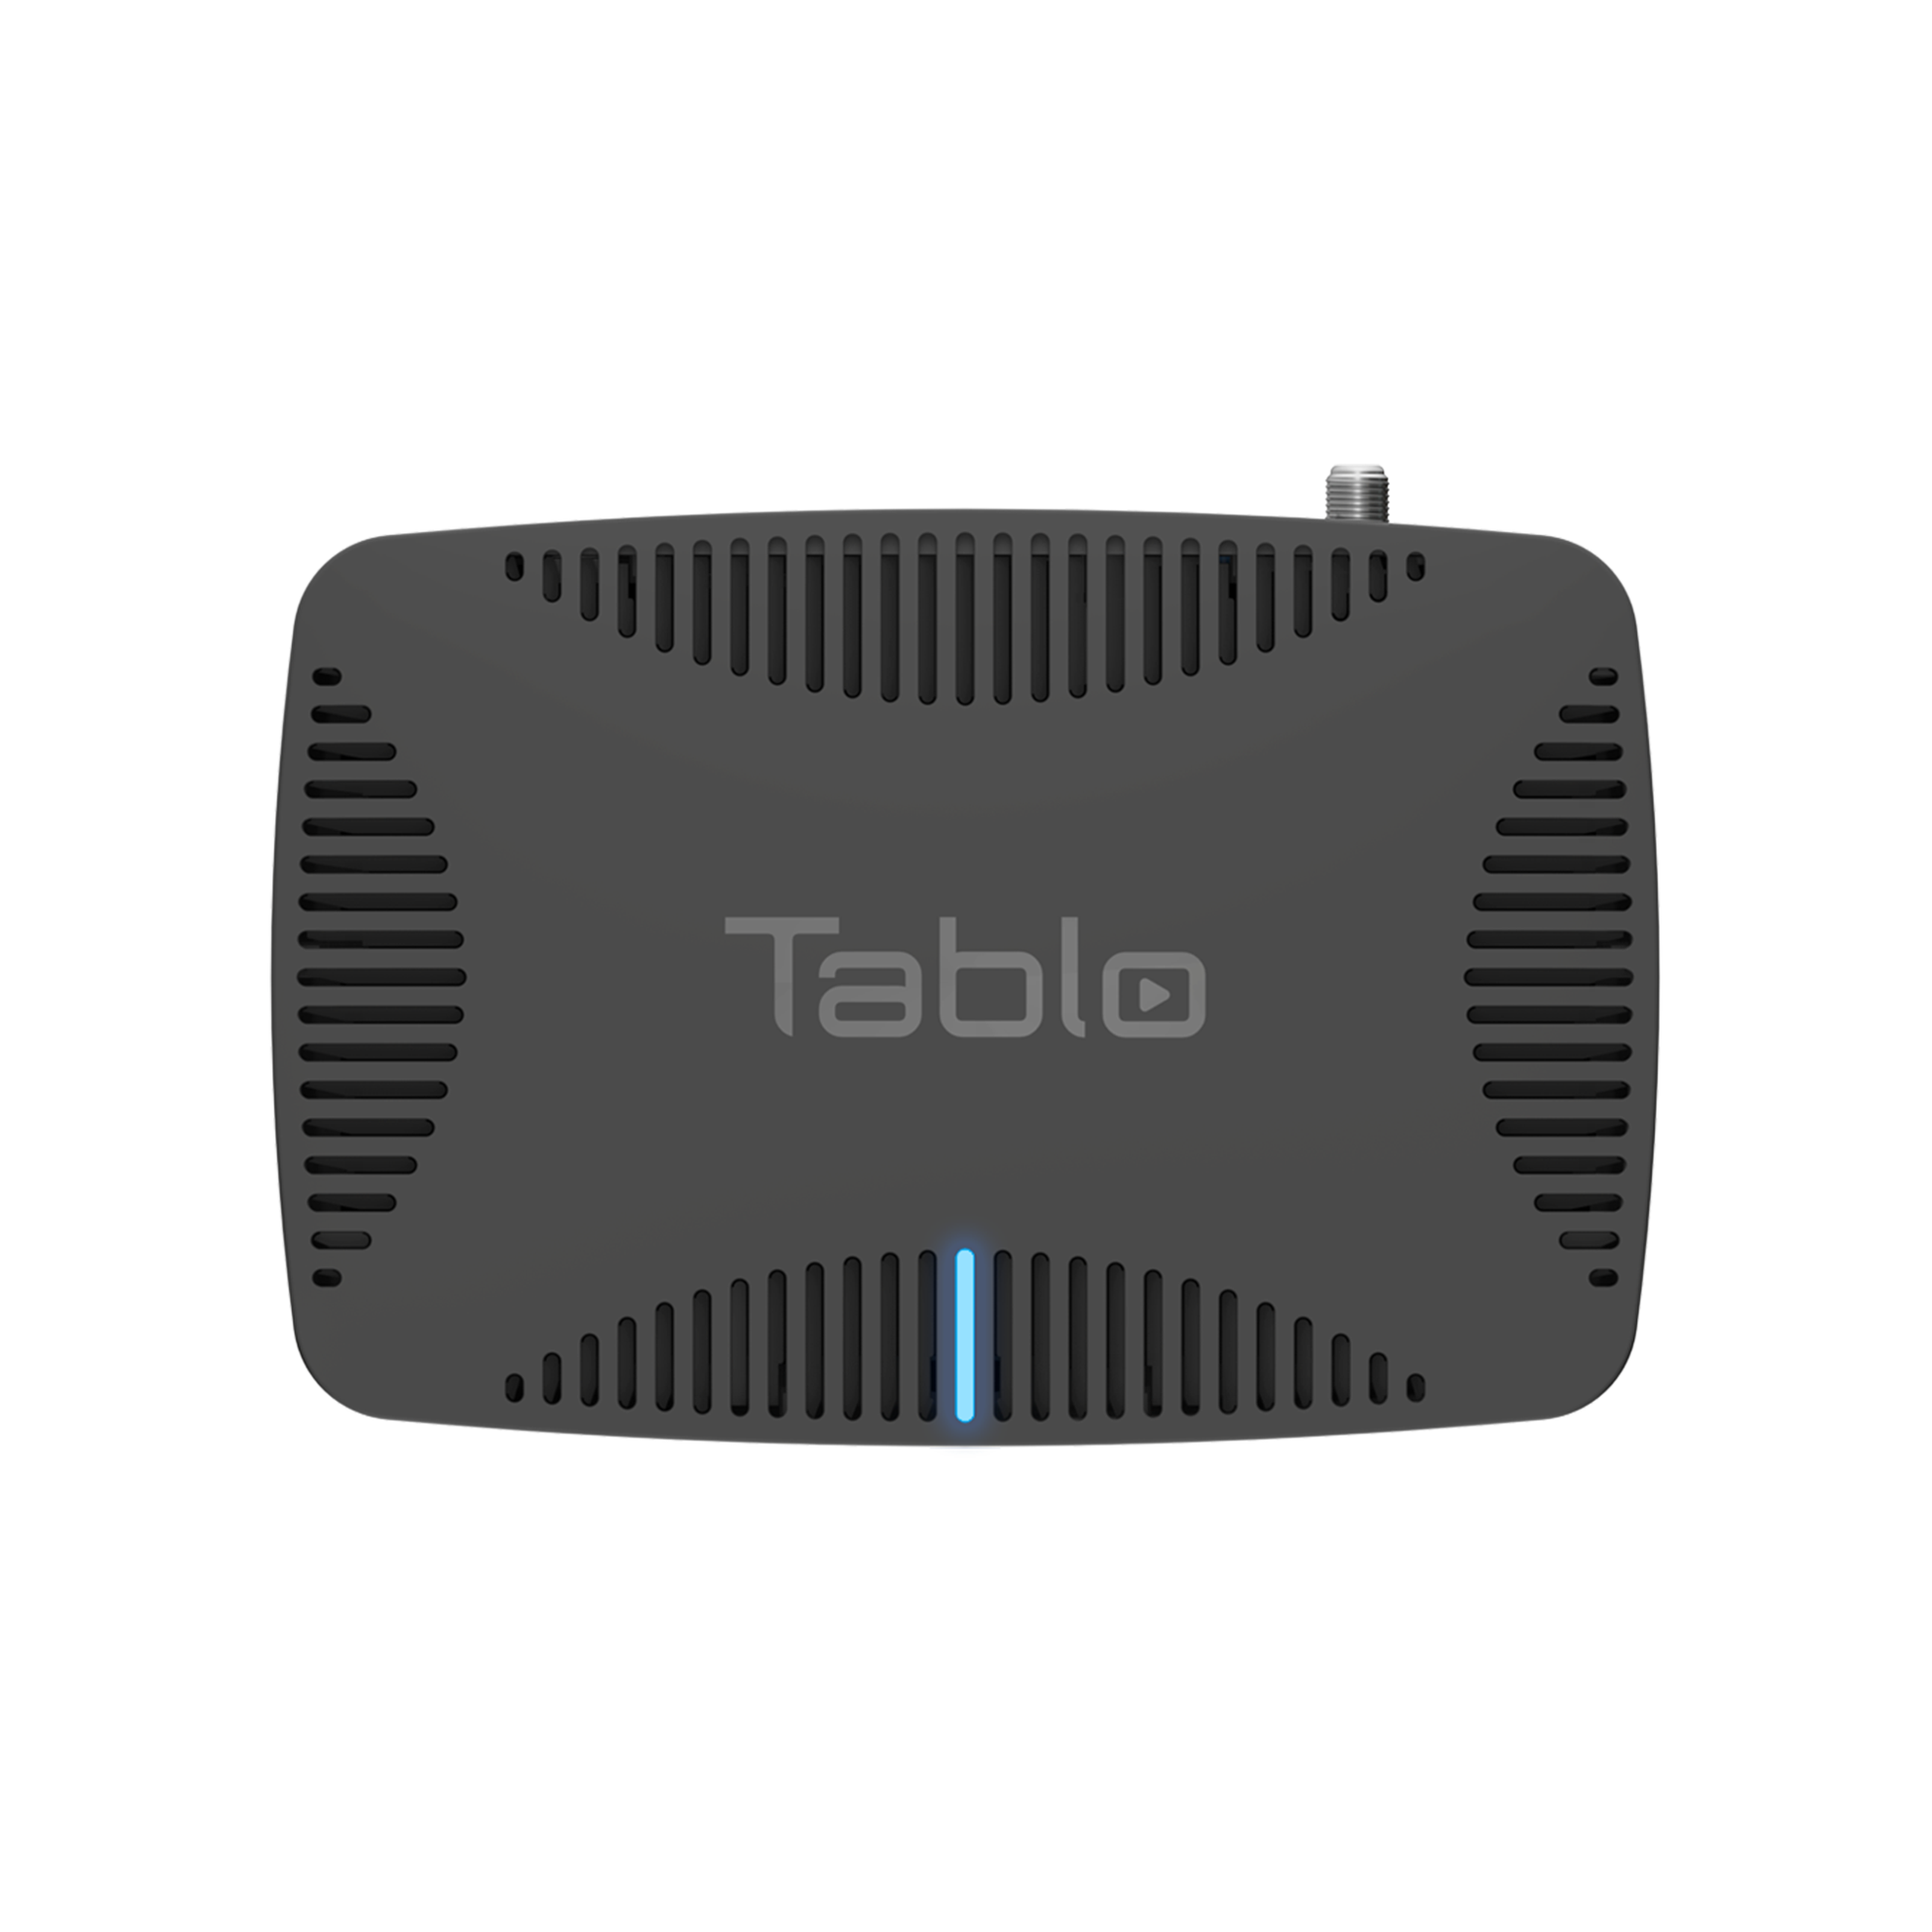 Tablo QUAD 1TB Over-The-Air (OTA) DVR (Digital Video Recorder) for Cord Cutters. DVR hardware top view.